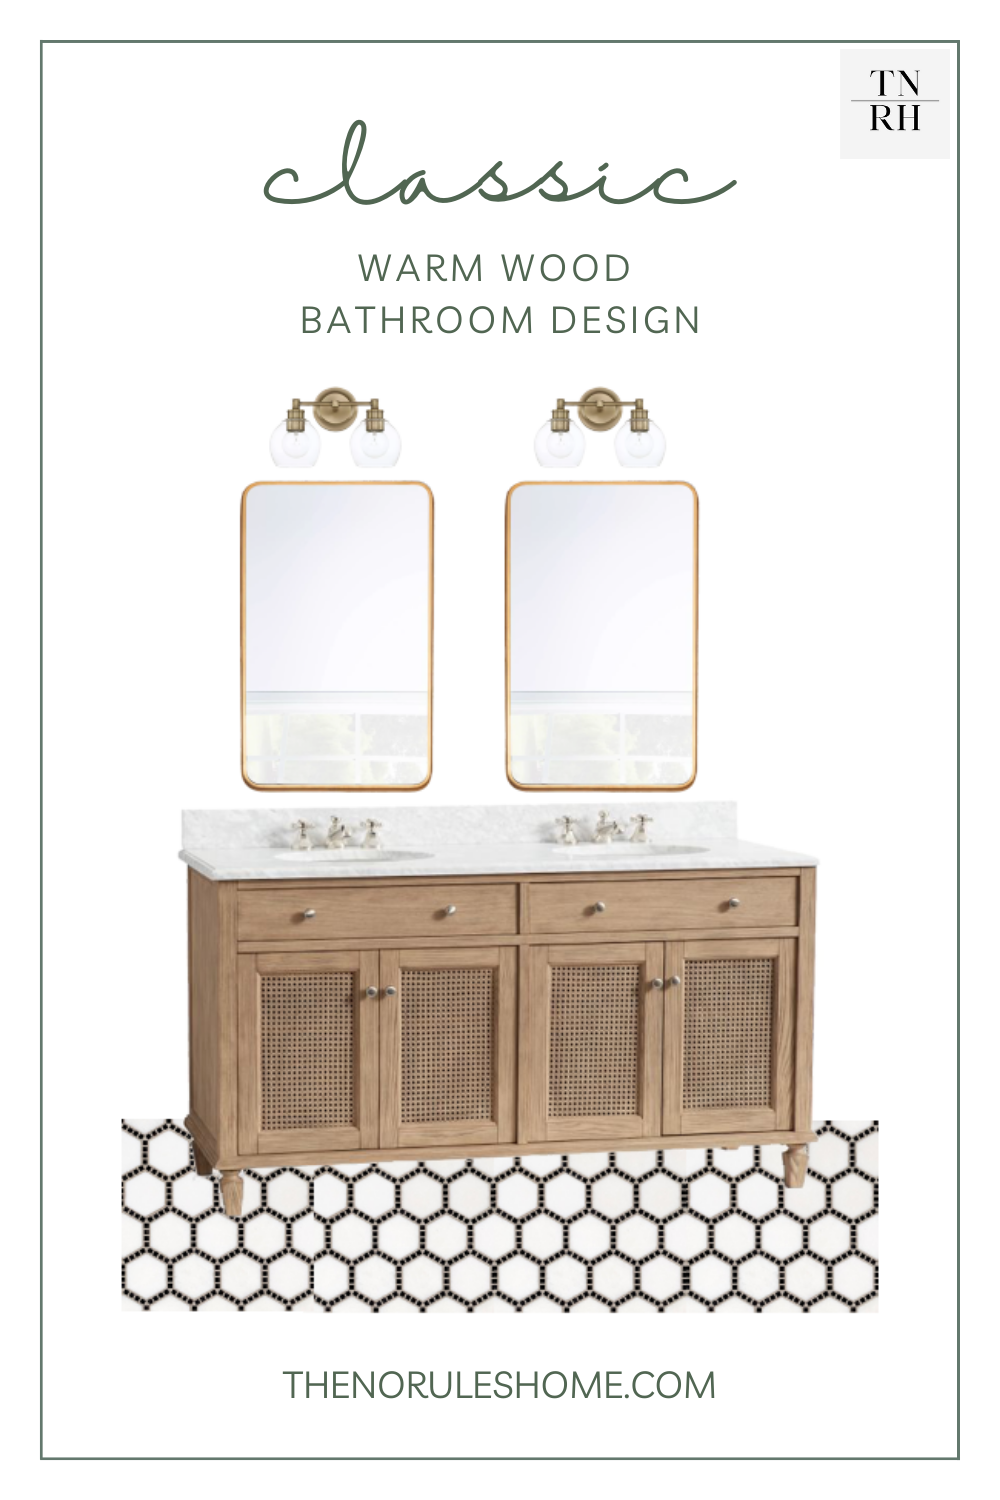 a classic bathroom design with a wood vanity, gold mirror, vanity light and graphic floor tile